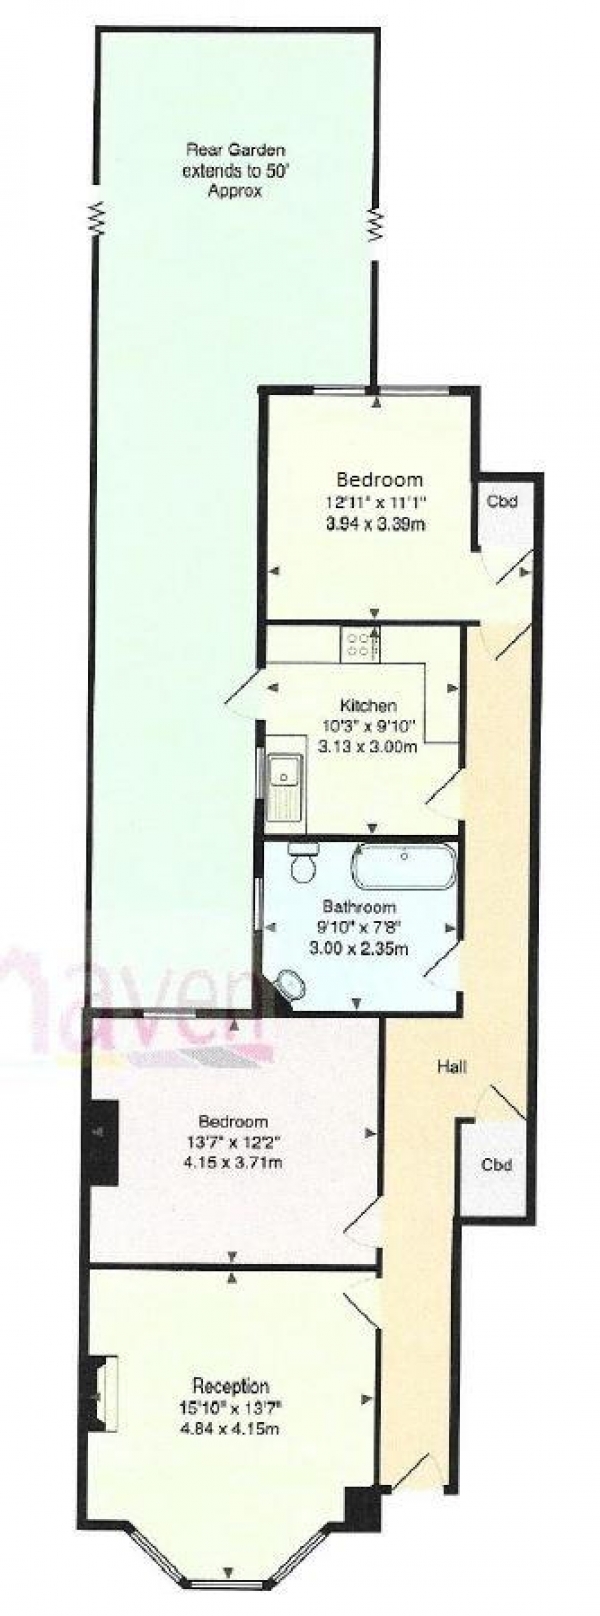 Floor Plan for 2 Bedroom Flat for Sale in Sedgemere Avenue, East Finchley, N2, N2, 0SY -  &pound600,000